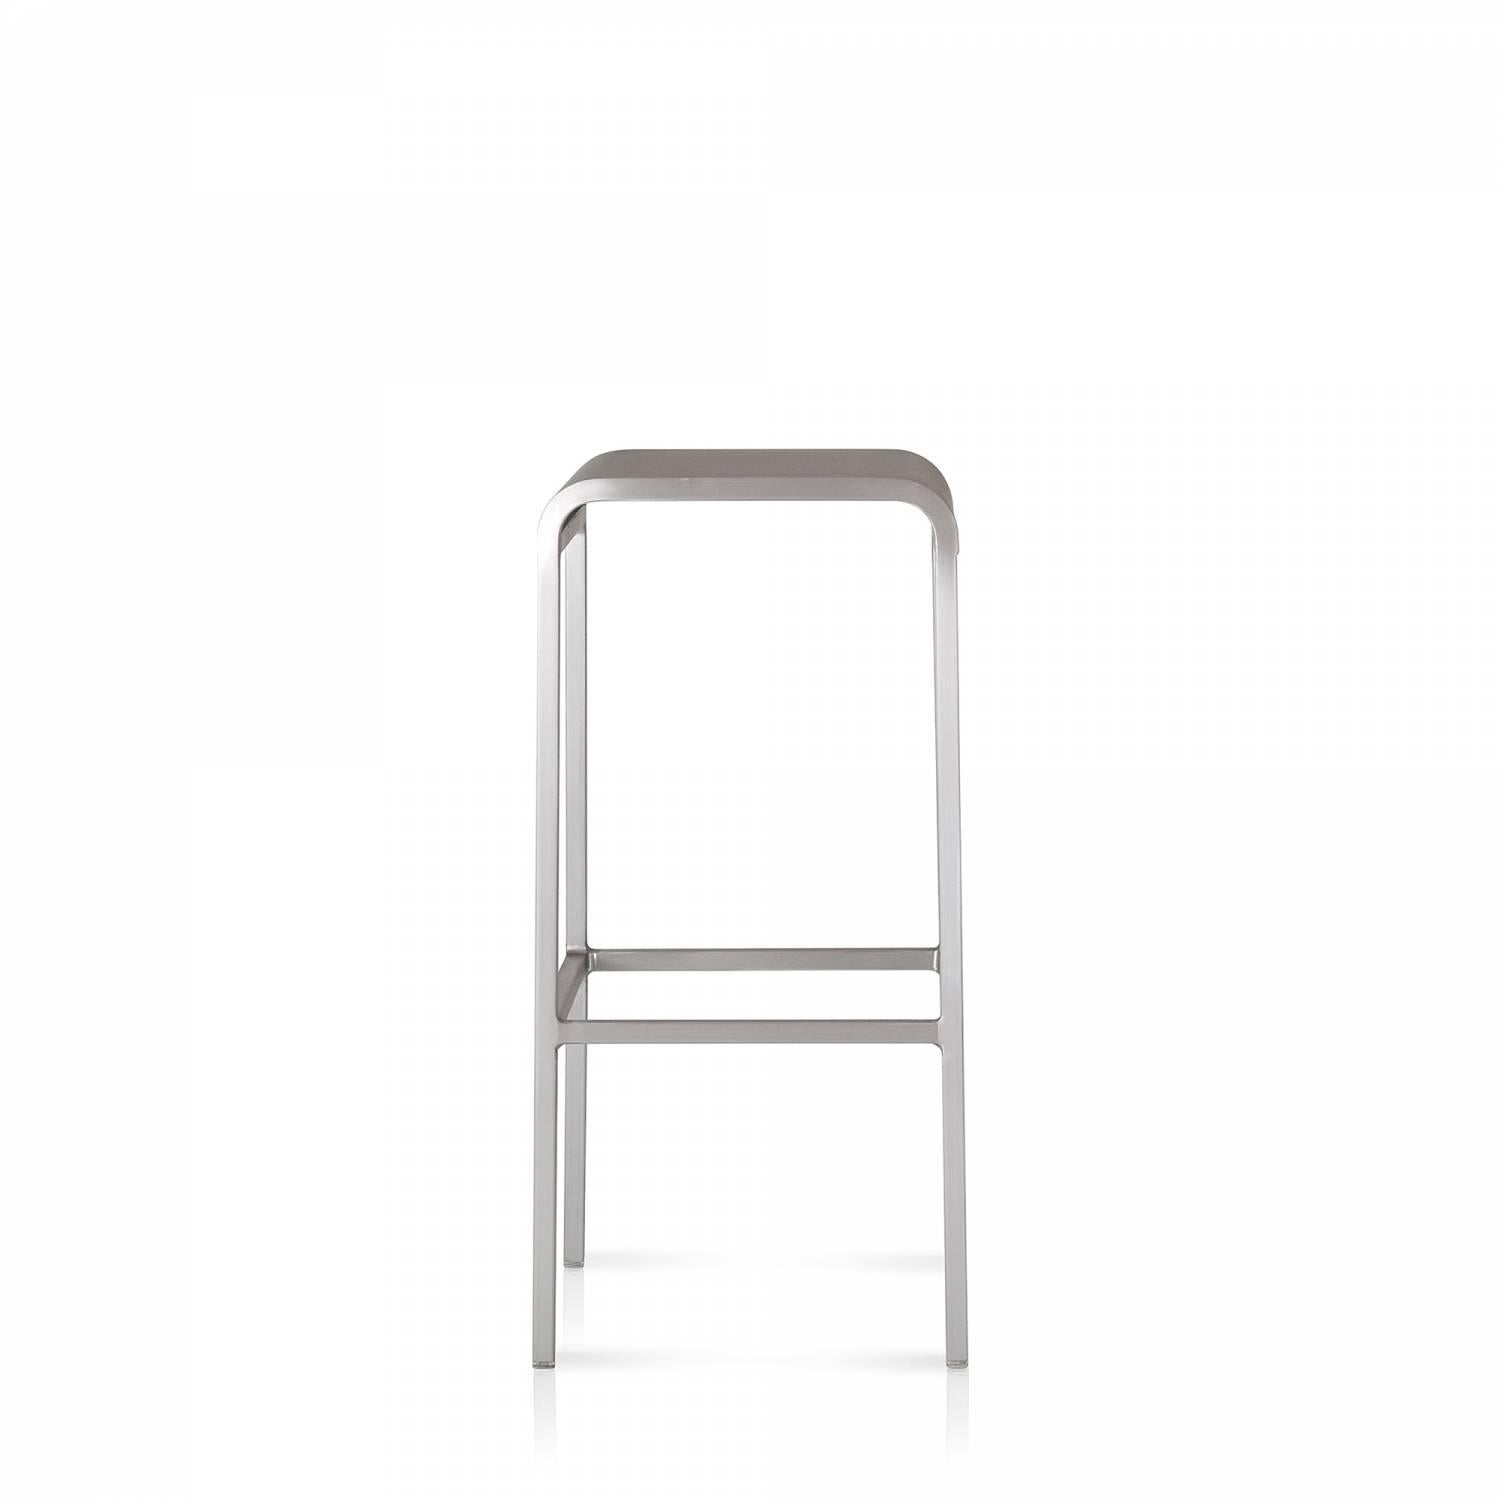 Emeco’s collaboration with Norman Foster resulted in the “20-06” chair. Foster envisioned a “neutral” chair - visually and physically lightweight. But the 20-06 is also super strong-tested to 445Kg. Lord Norman Foster said ”I appreciate the